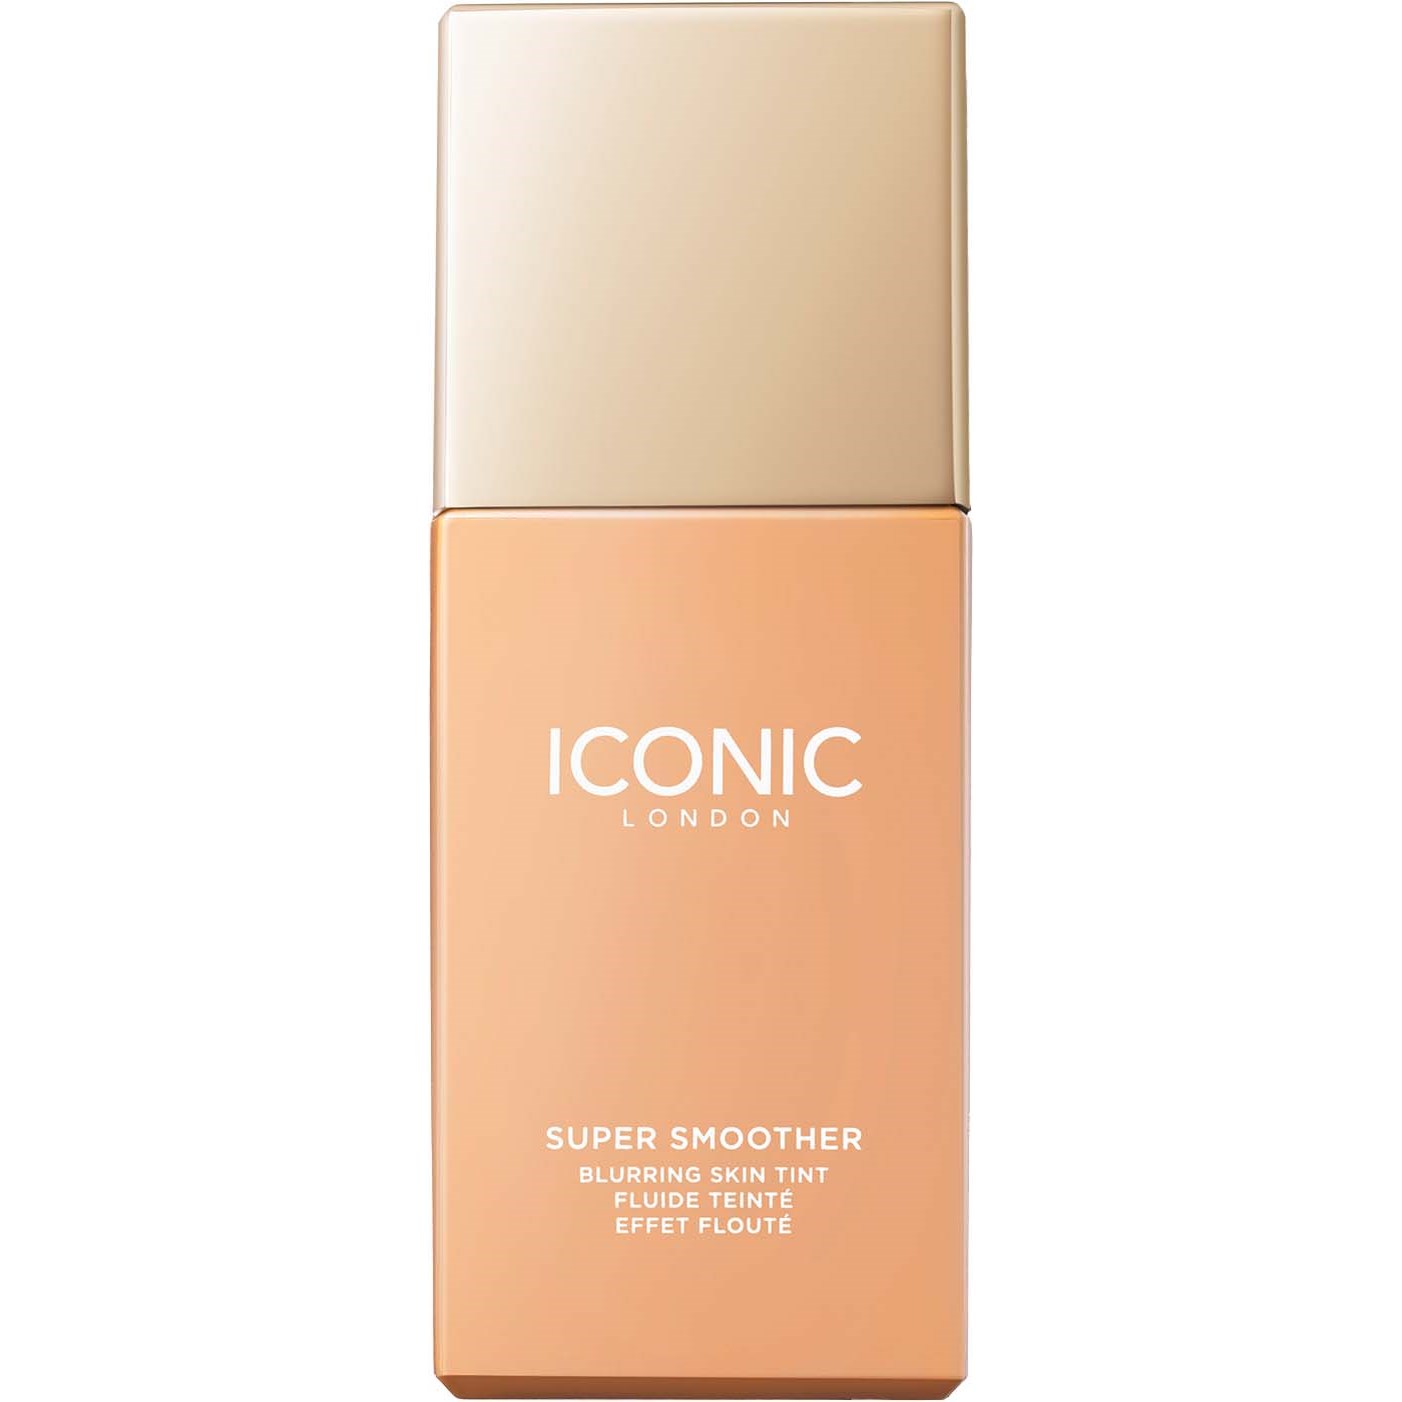 ICONIC London Super Smoother Blurring Skin Tint Warm Light